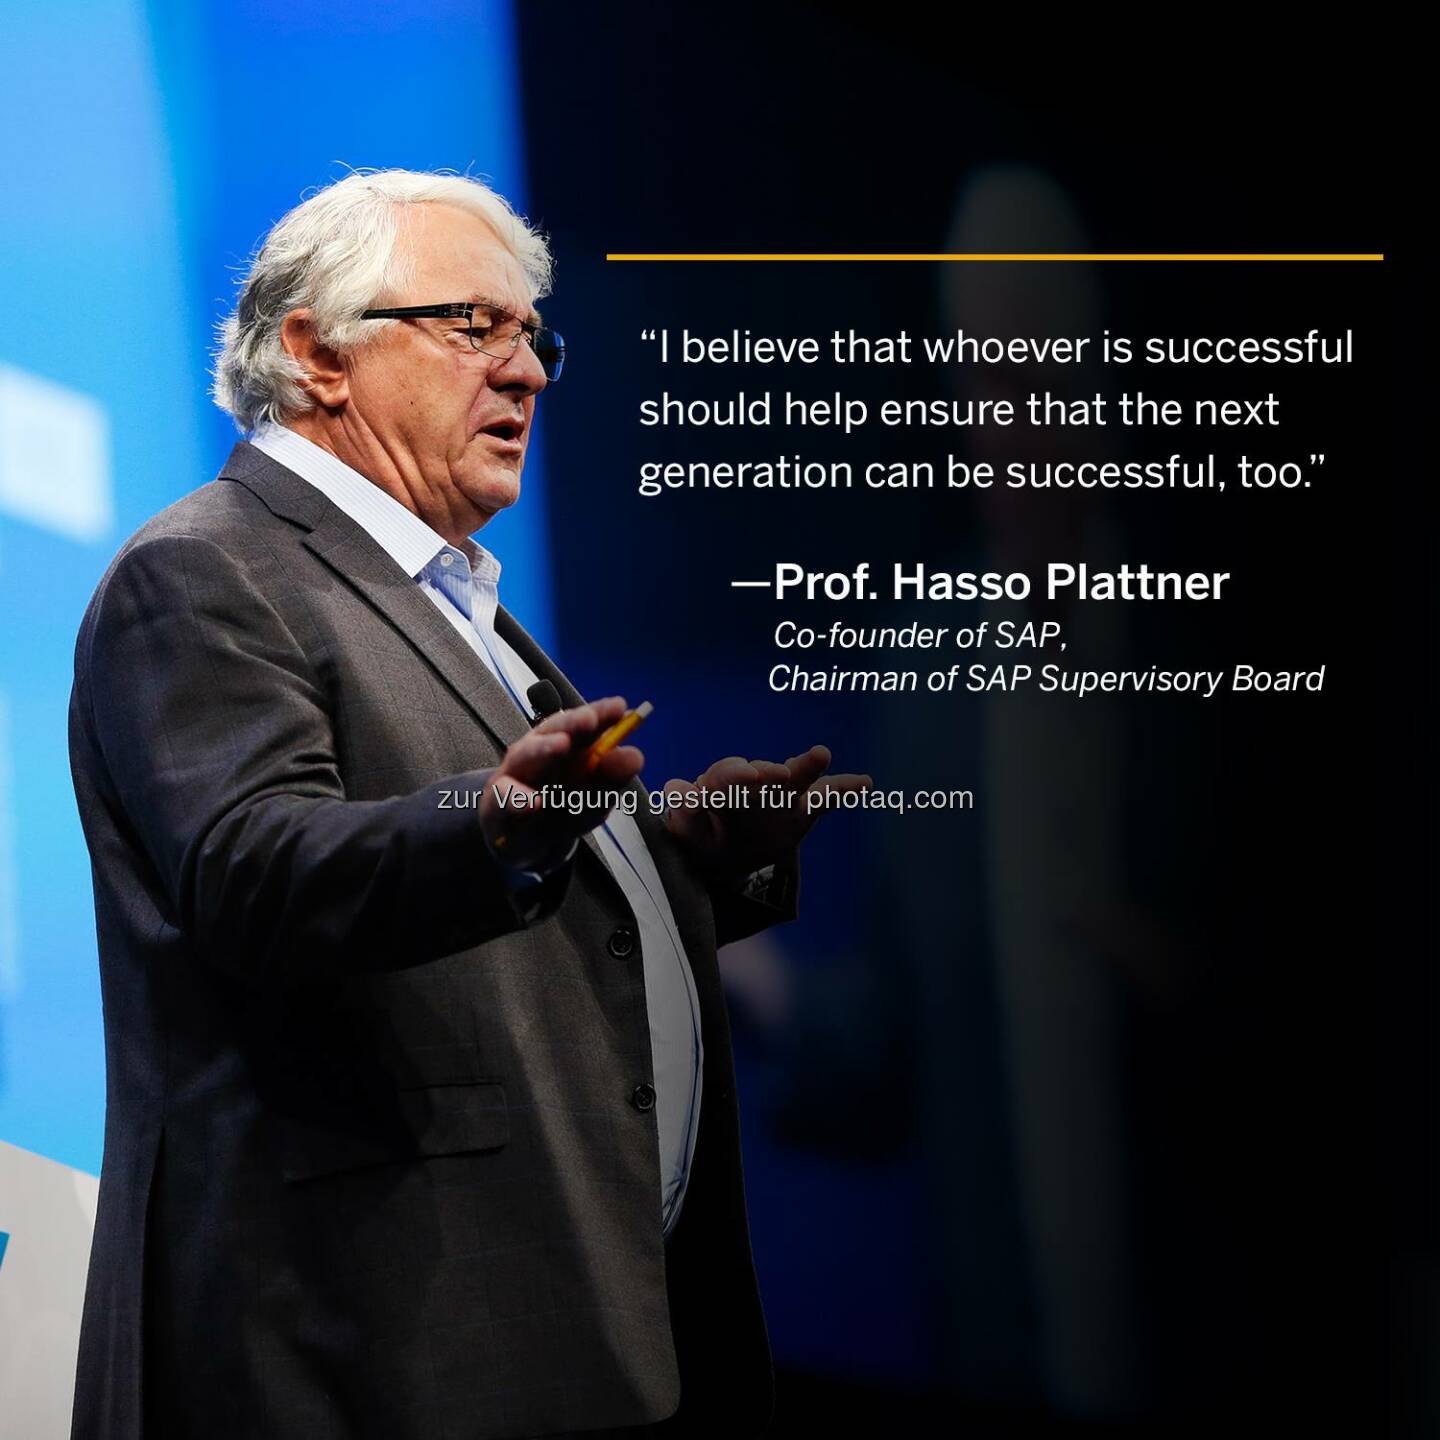 Our Founder, Prof. Hasso Plattner, turns 73 today! Wish him a happy birthday in the comments!  Source: http://facebook.com/SAP